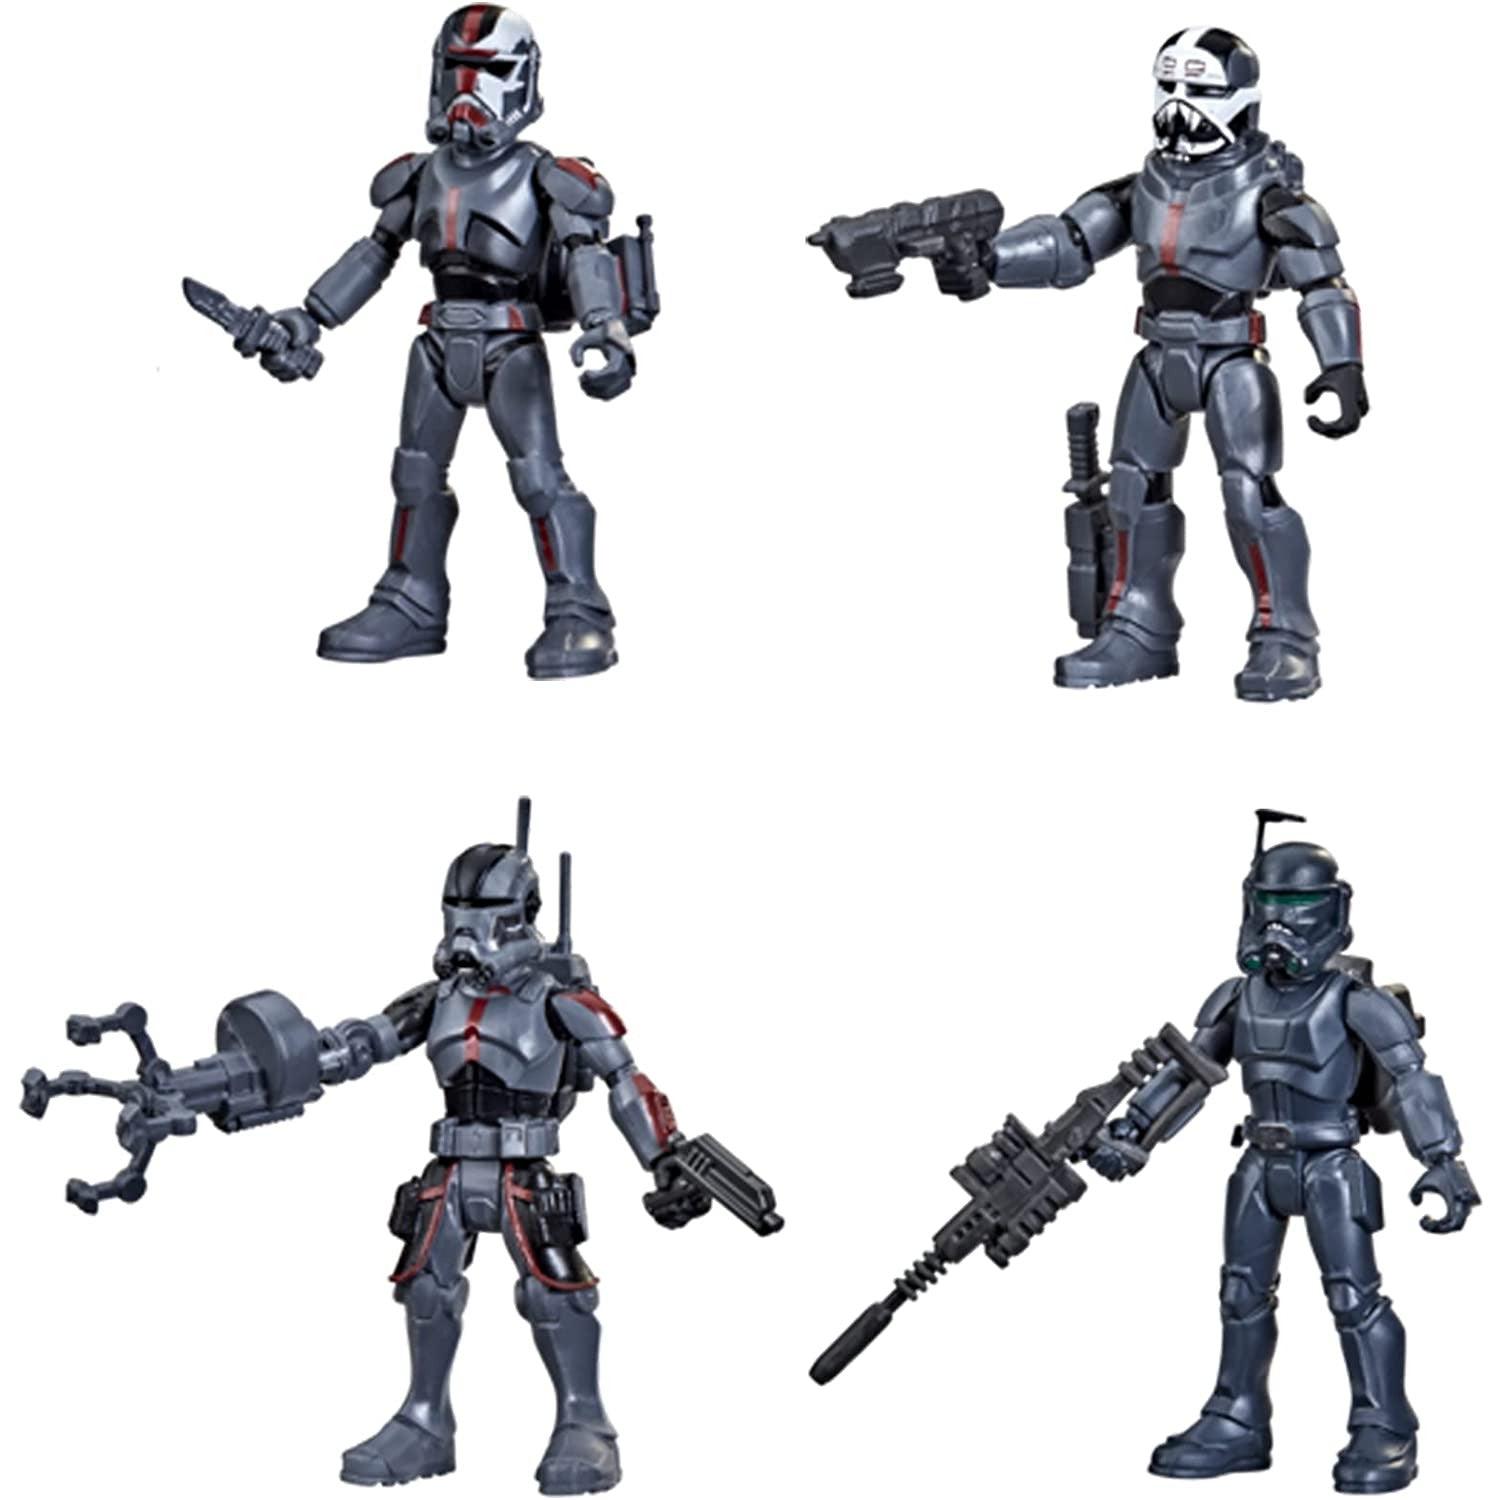 Star Wars Mission Fleet Clone Commando Clash 2.5-Inch-Scale Action Figure 4-Pack with Multiple Accessories, Toys for Kids Ages 4 and Up,F5333 - BumbleToys - 3+ years, Hasbro, Mandalorian, Mission Fleet, OXE, Pre-Order, star wars